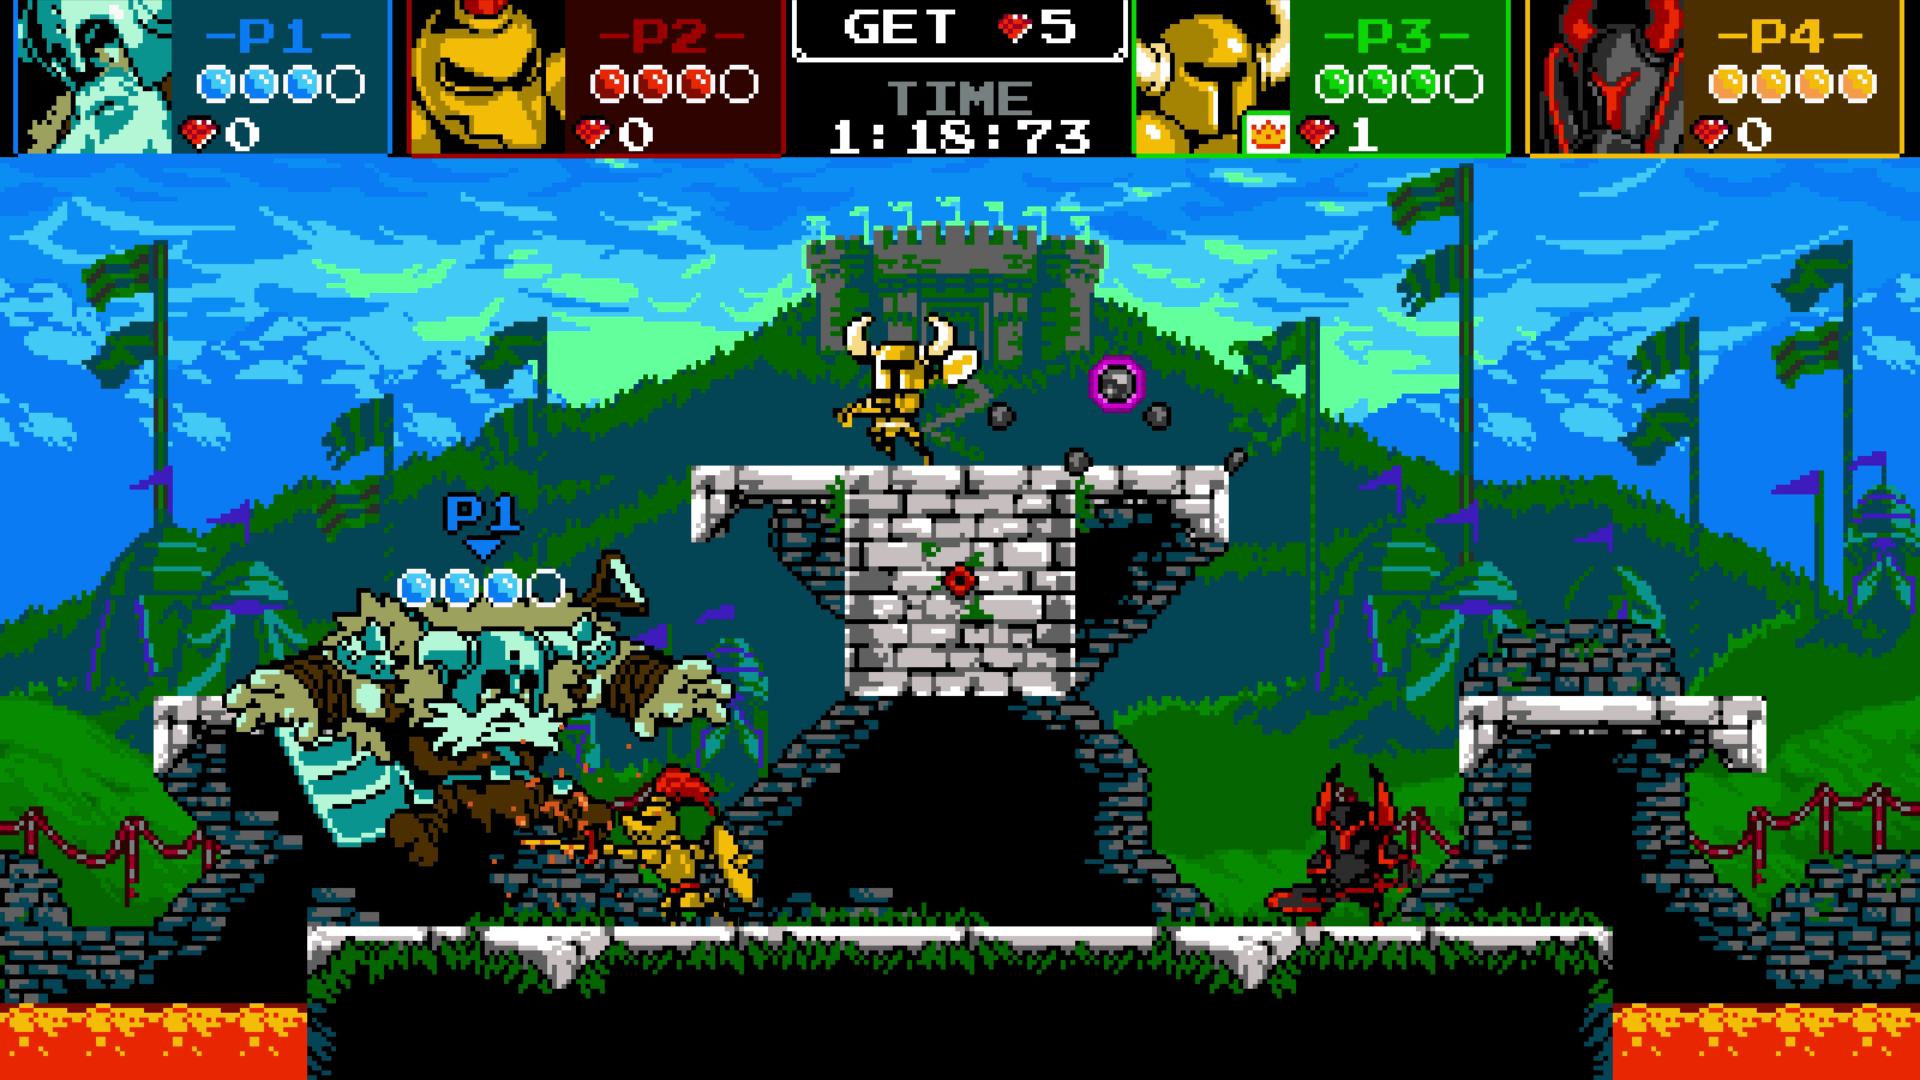 Pictures Of Shovel Knight Bees A Fighting Game With Showdown